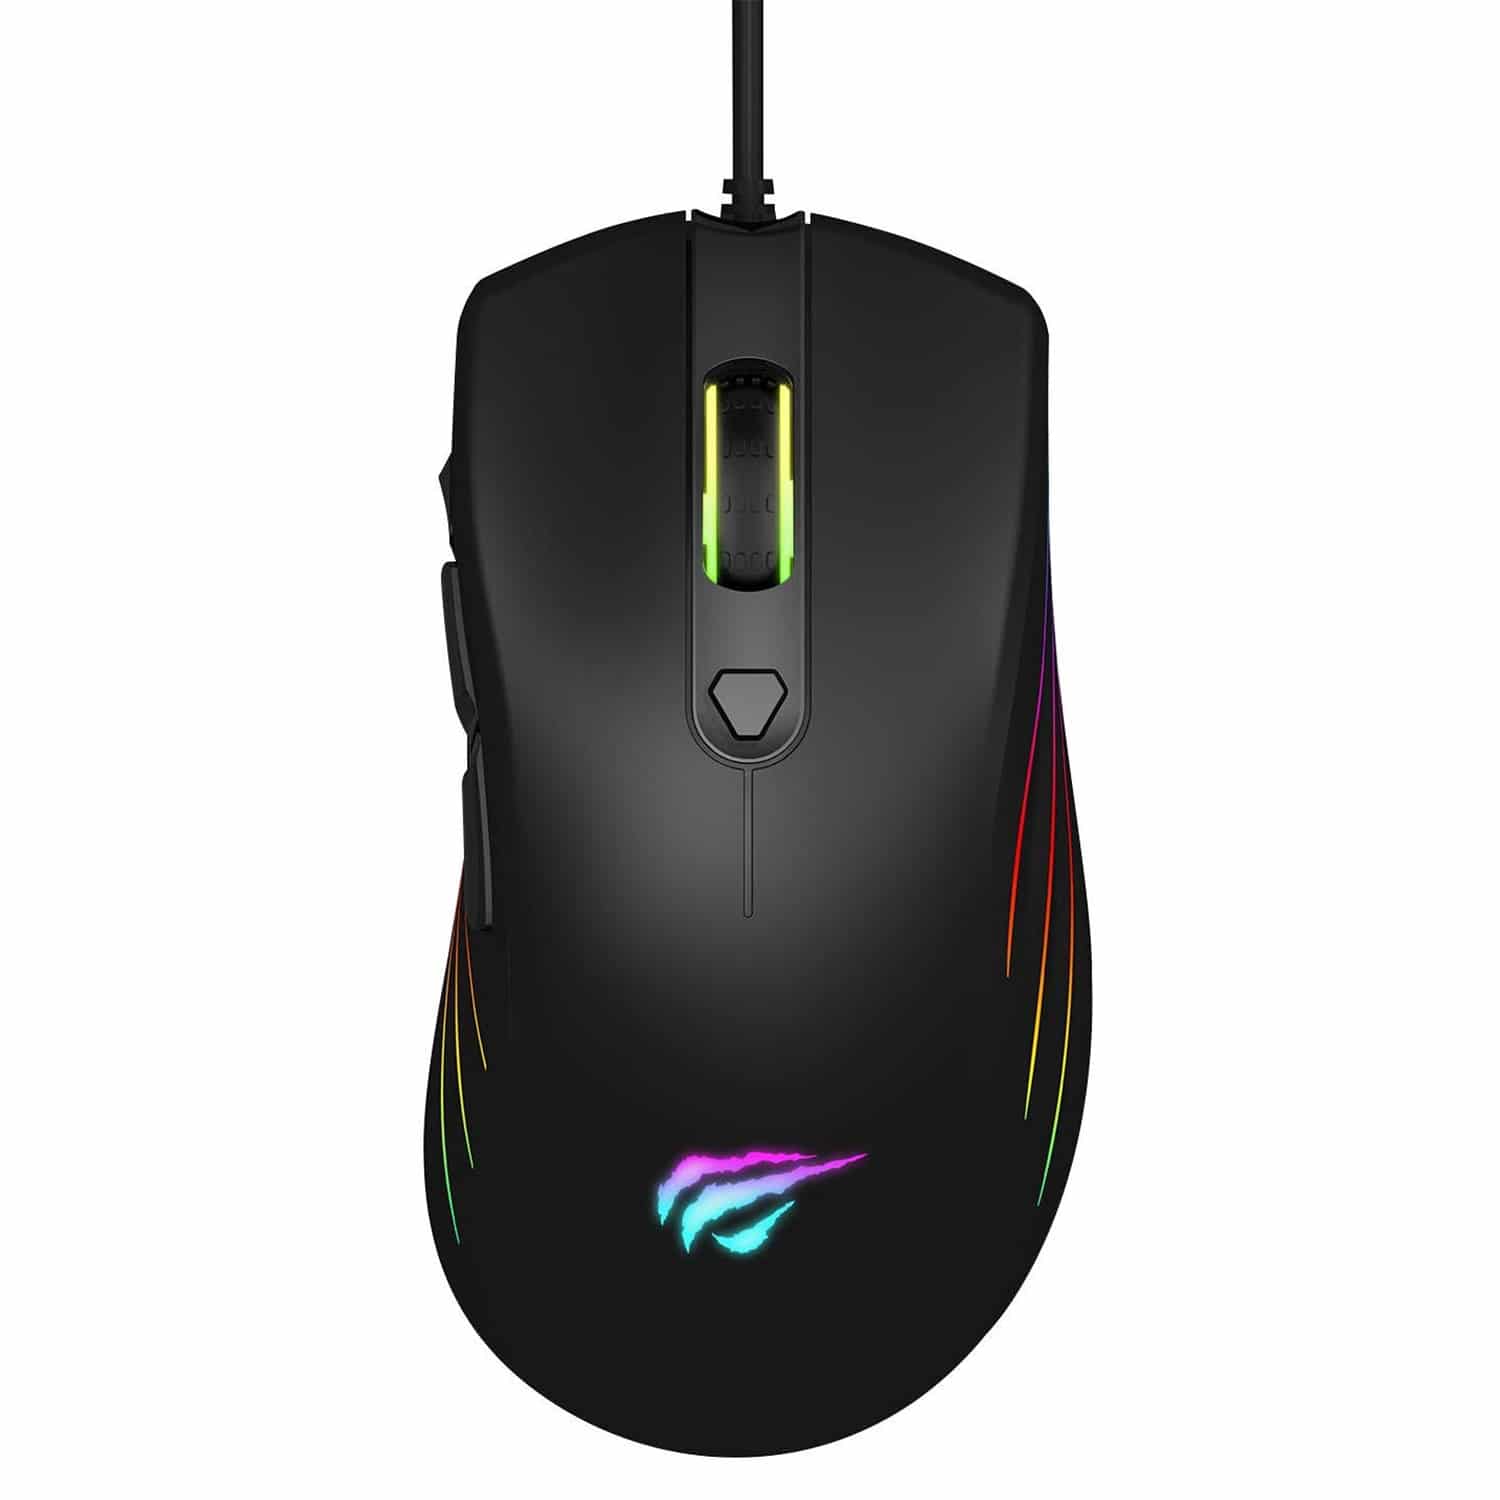 HAVIT MS762 Programmable Gaming Mouse with 7200 DPI, RGB Backlights, 7 Buttons